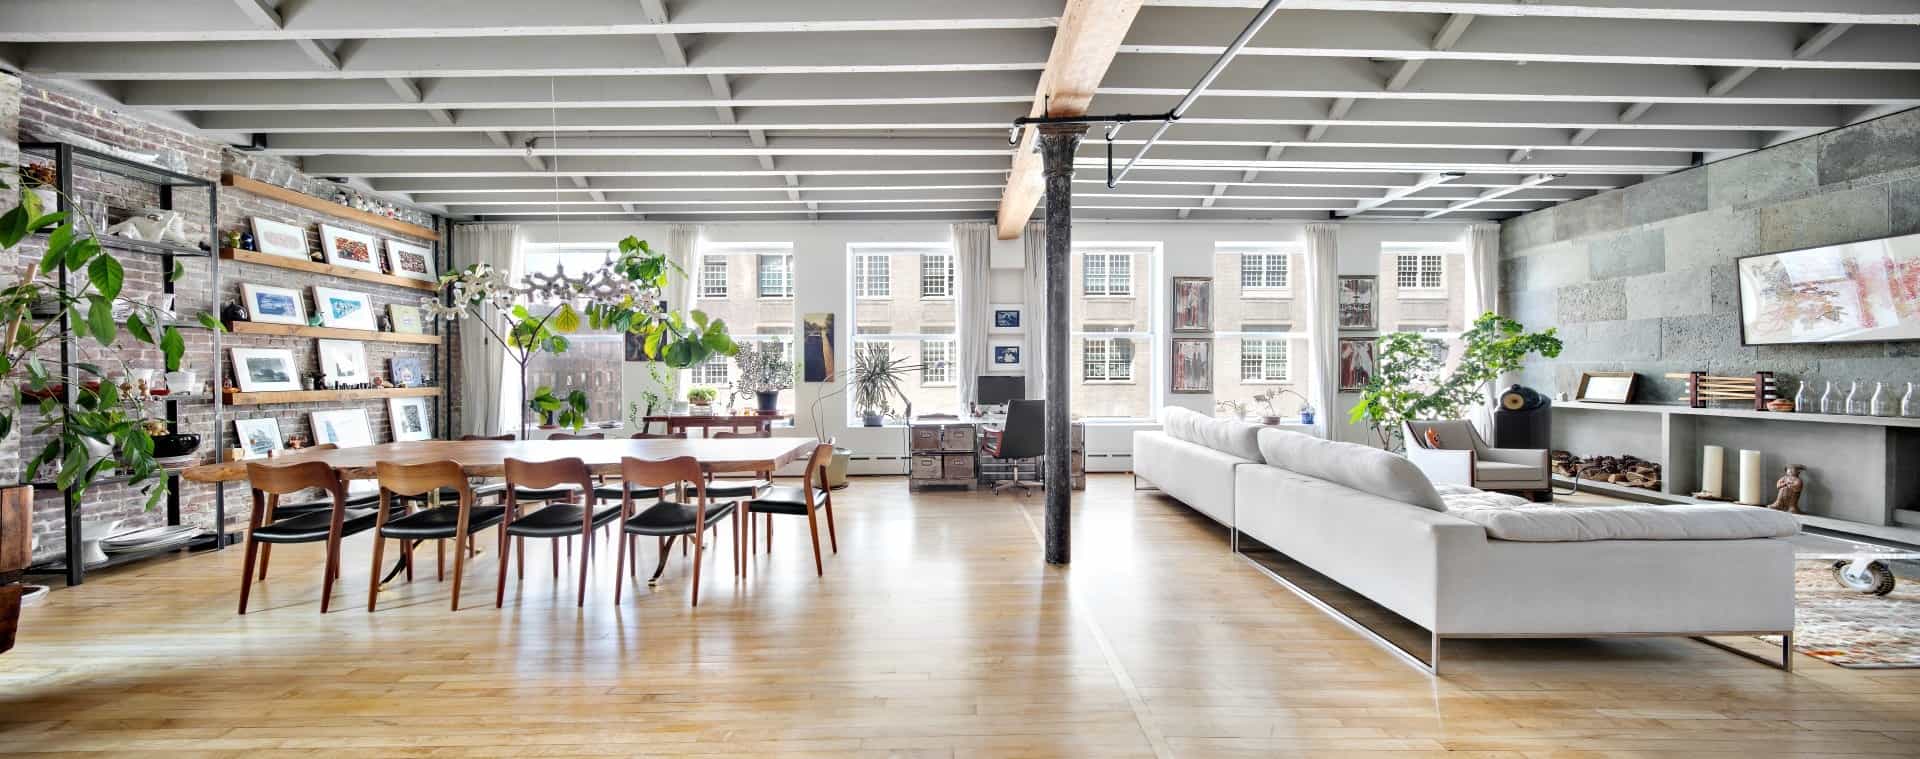 Sun Drenched Meticulously Designed Lower East Side Loft nyc new york city rental